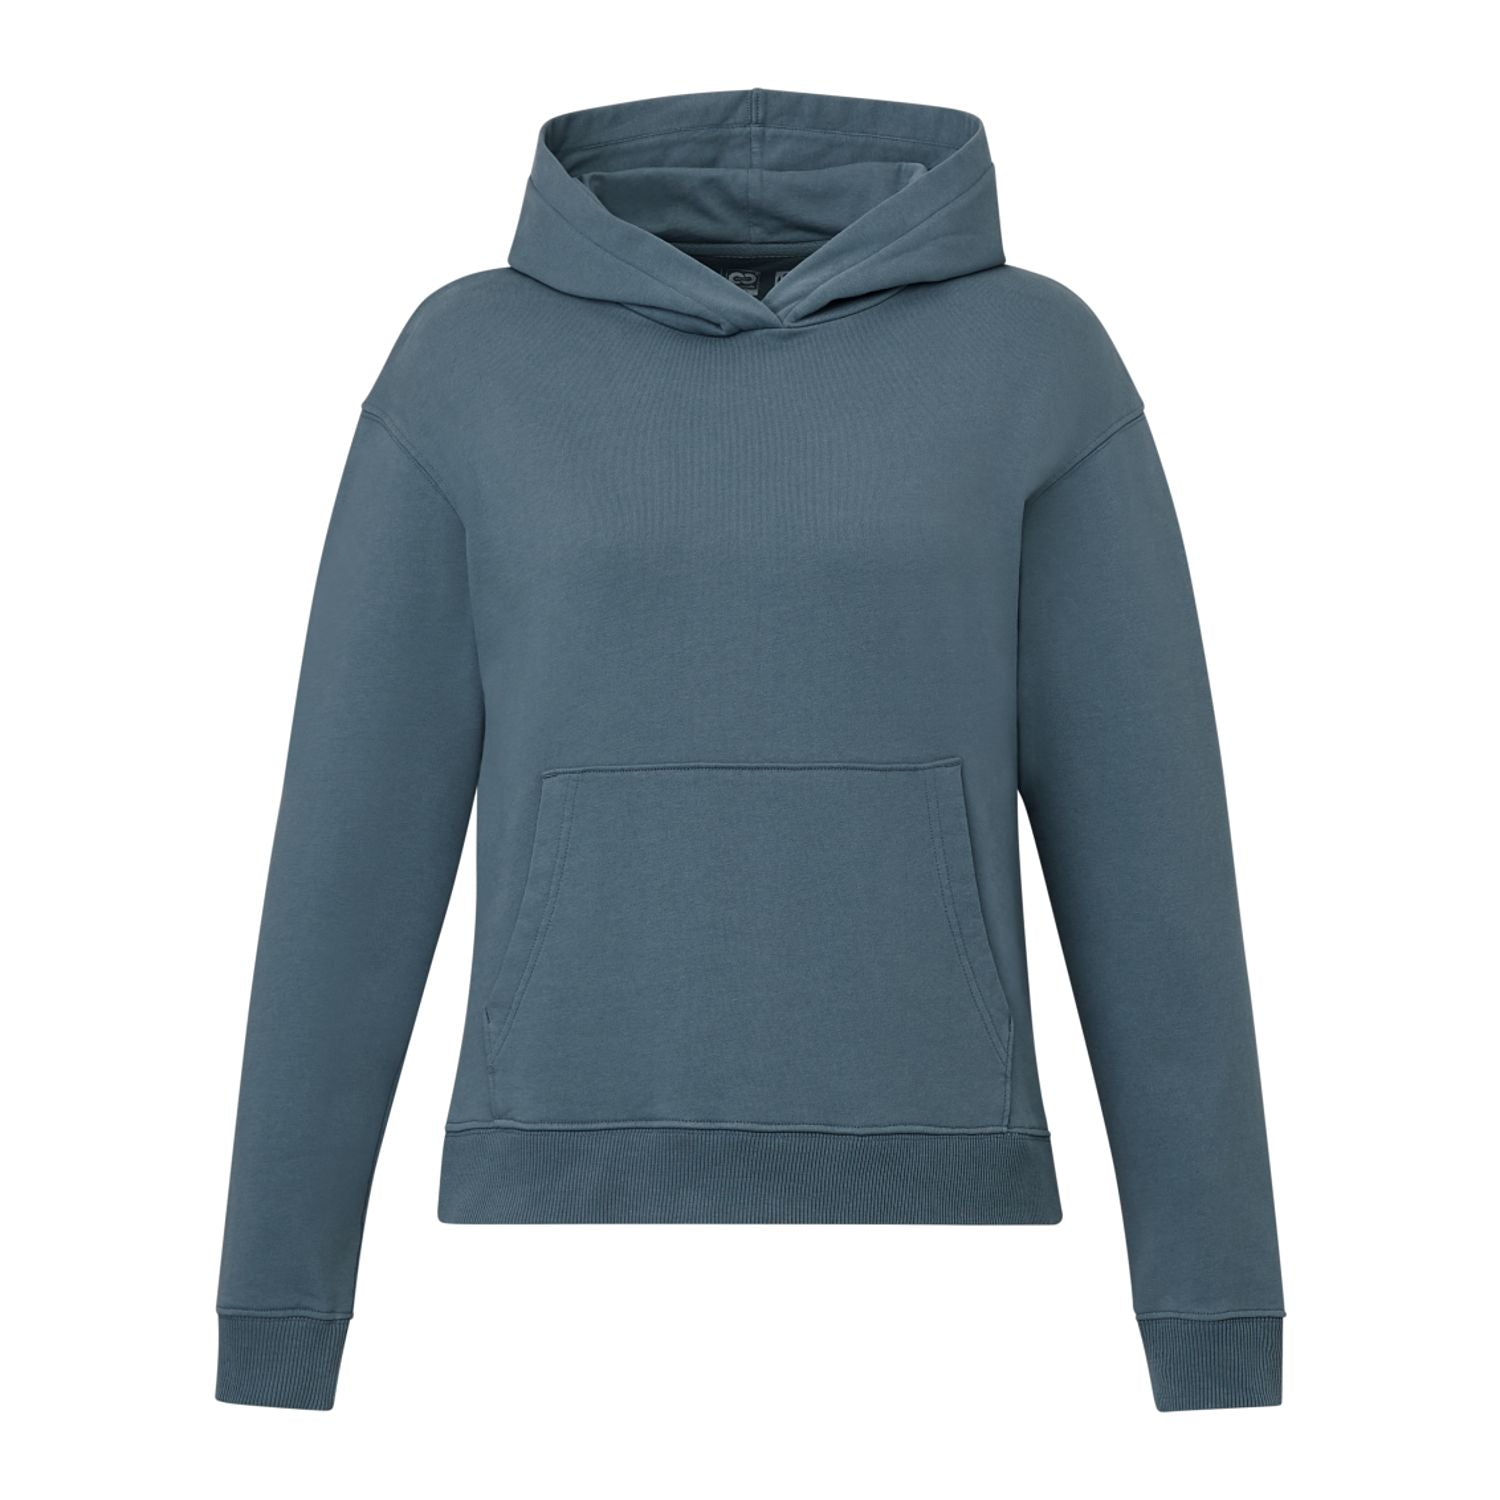 Customizable Tentree women's organic cotton classic hoodie in vintage blue.